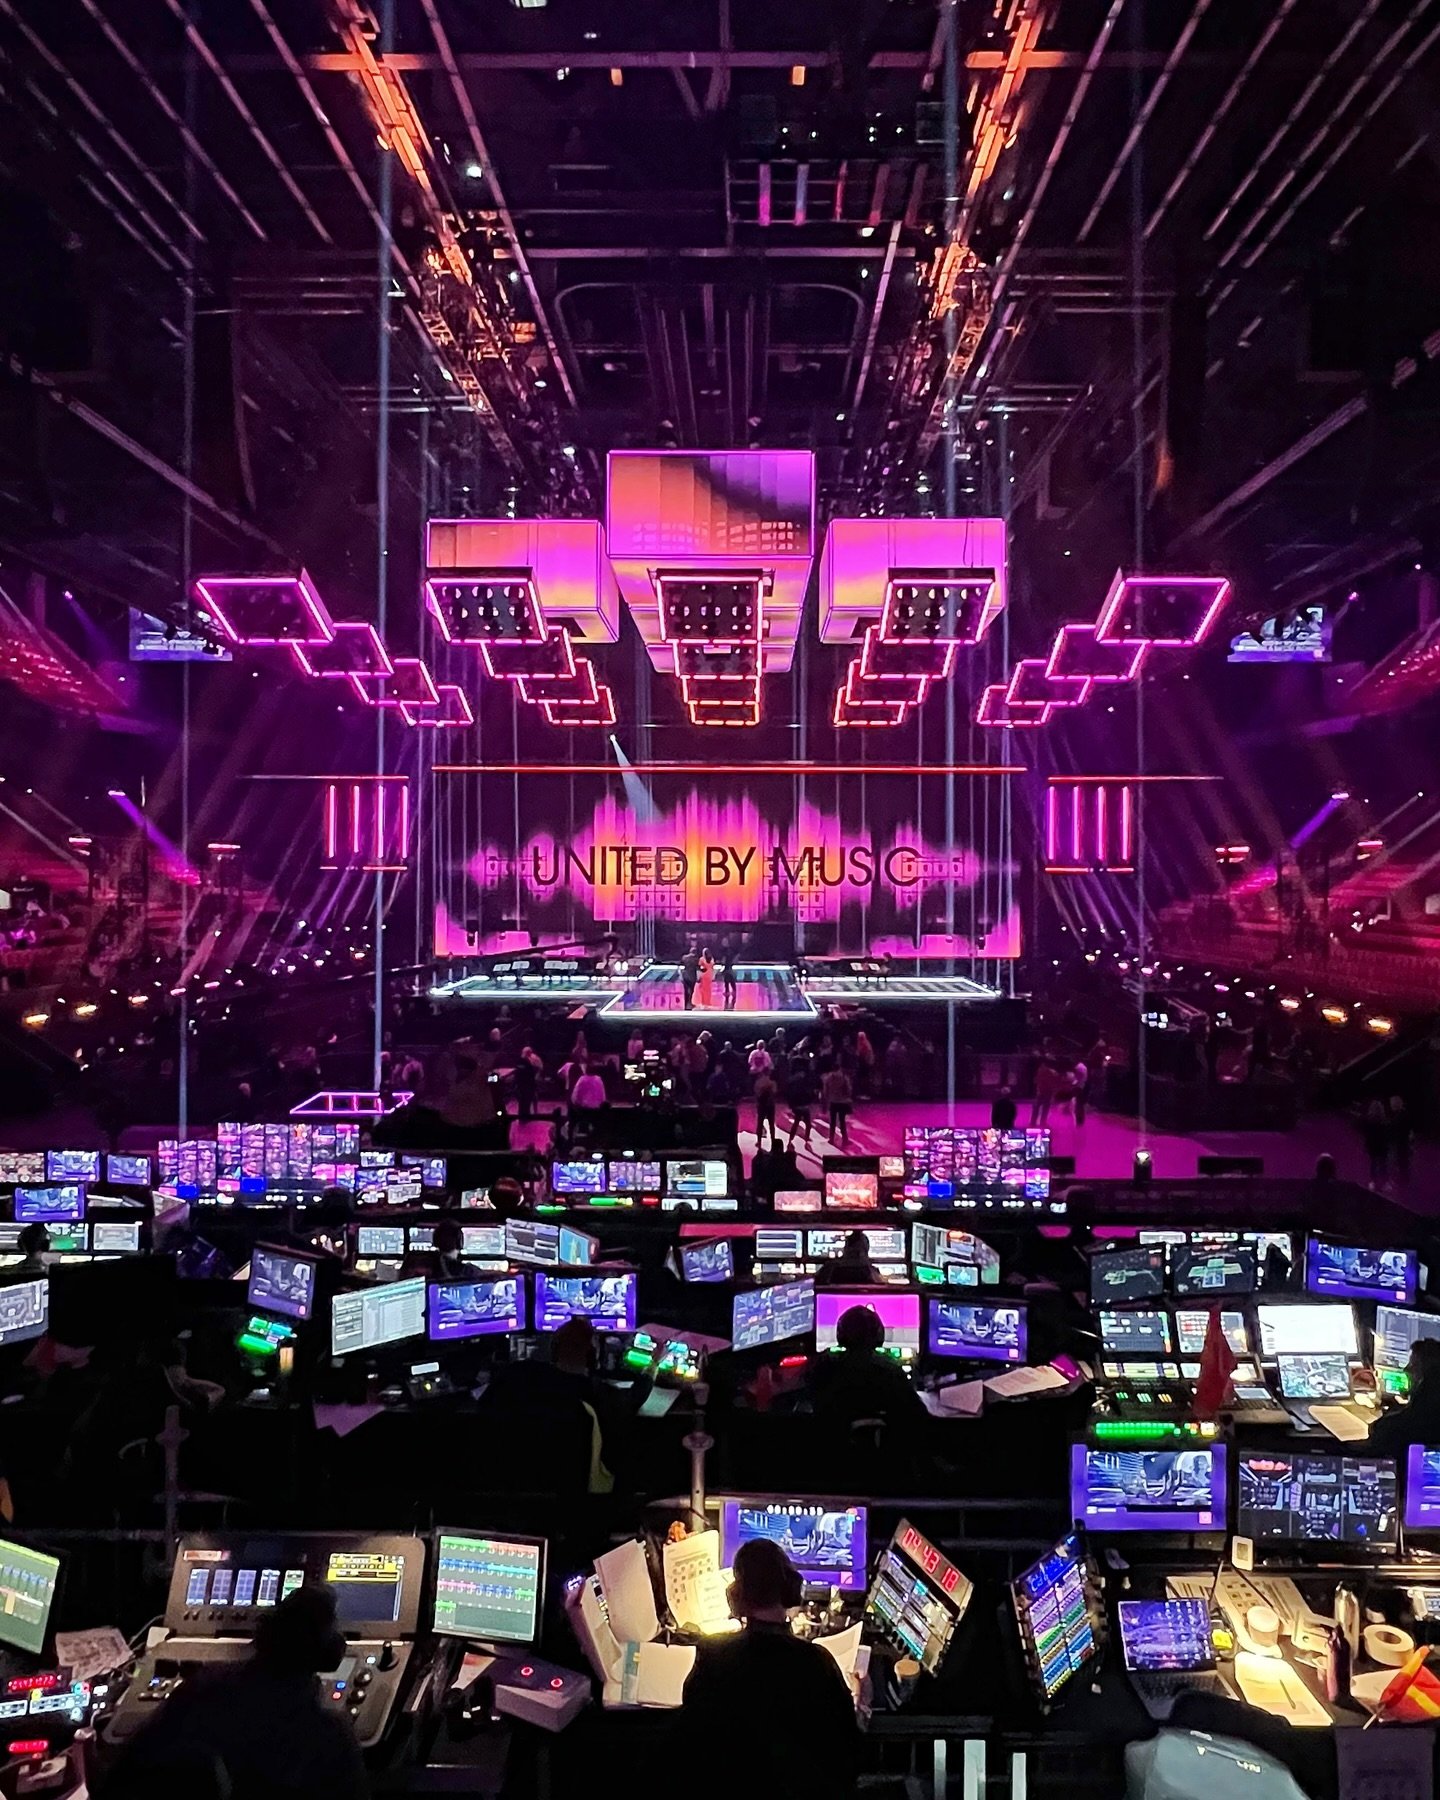 Just had two spectacular days at Eurovision in Malm&ouml; shooting a cool little story - I look forward to sharing it later in the week. The stage &amp; lighting looks fantastic, it&rsquo;s a beast of a production, very impressive. And the Aussie ent